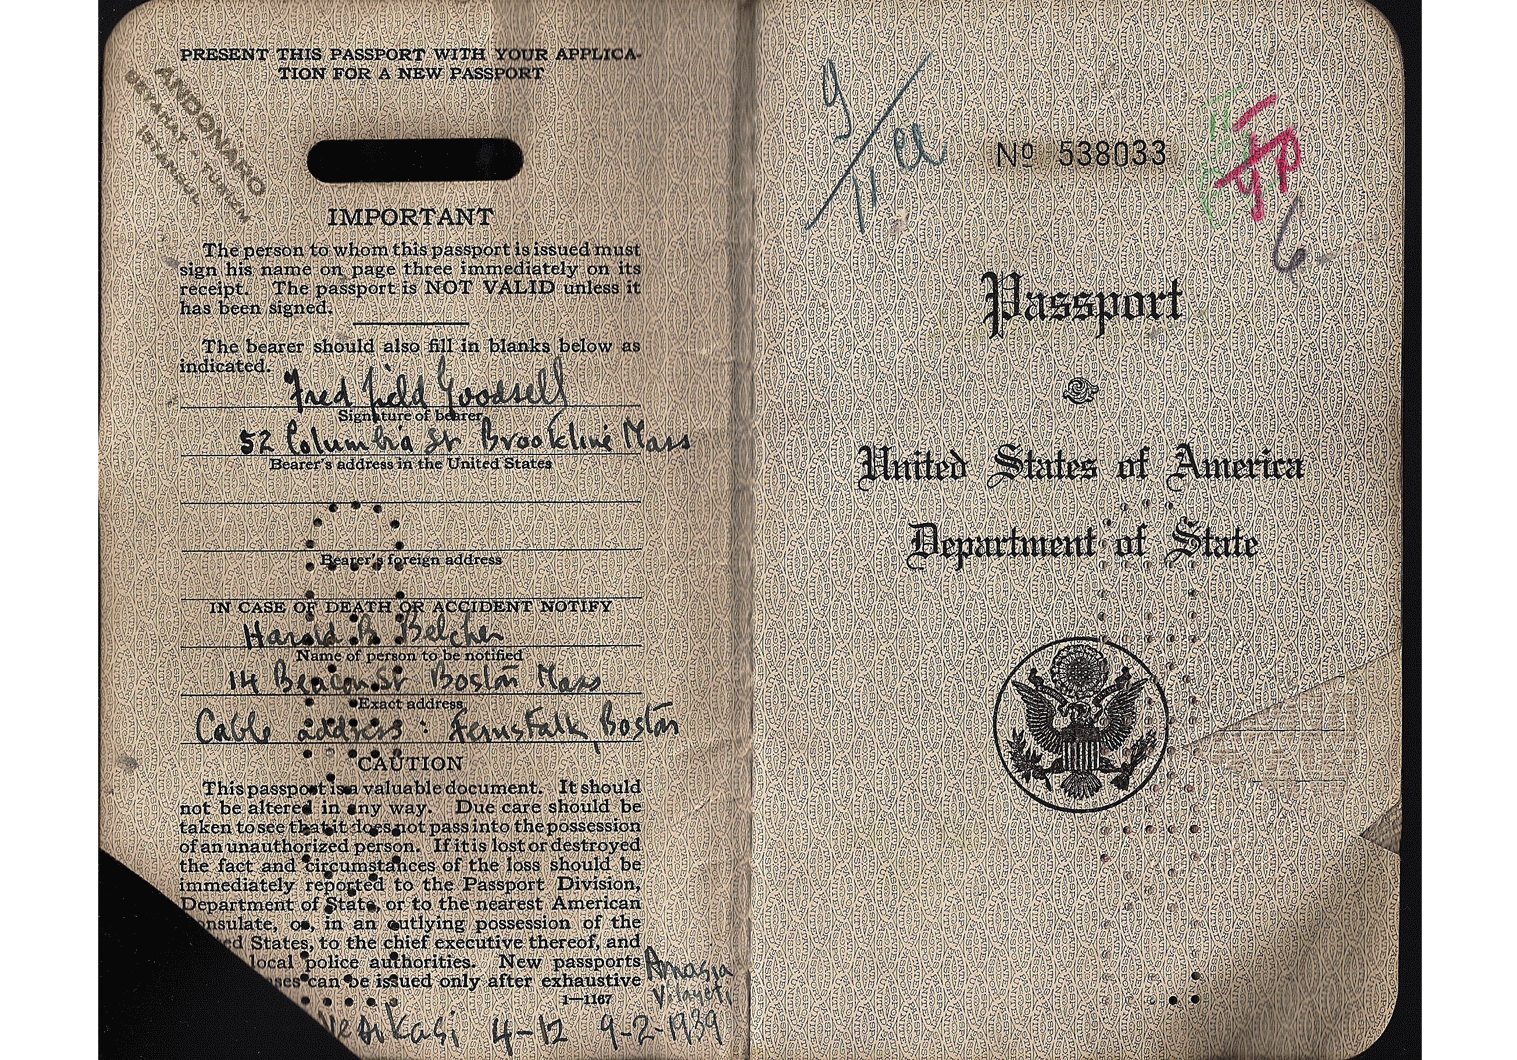 US passport used for China and Manchuria